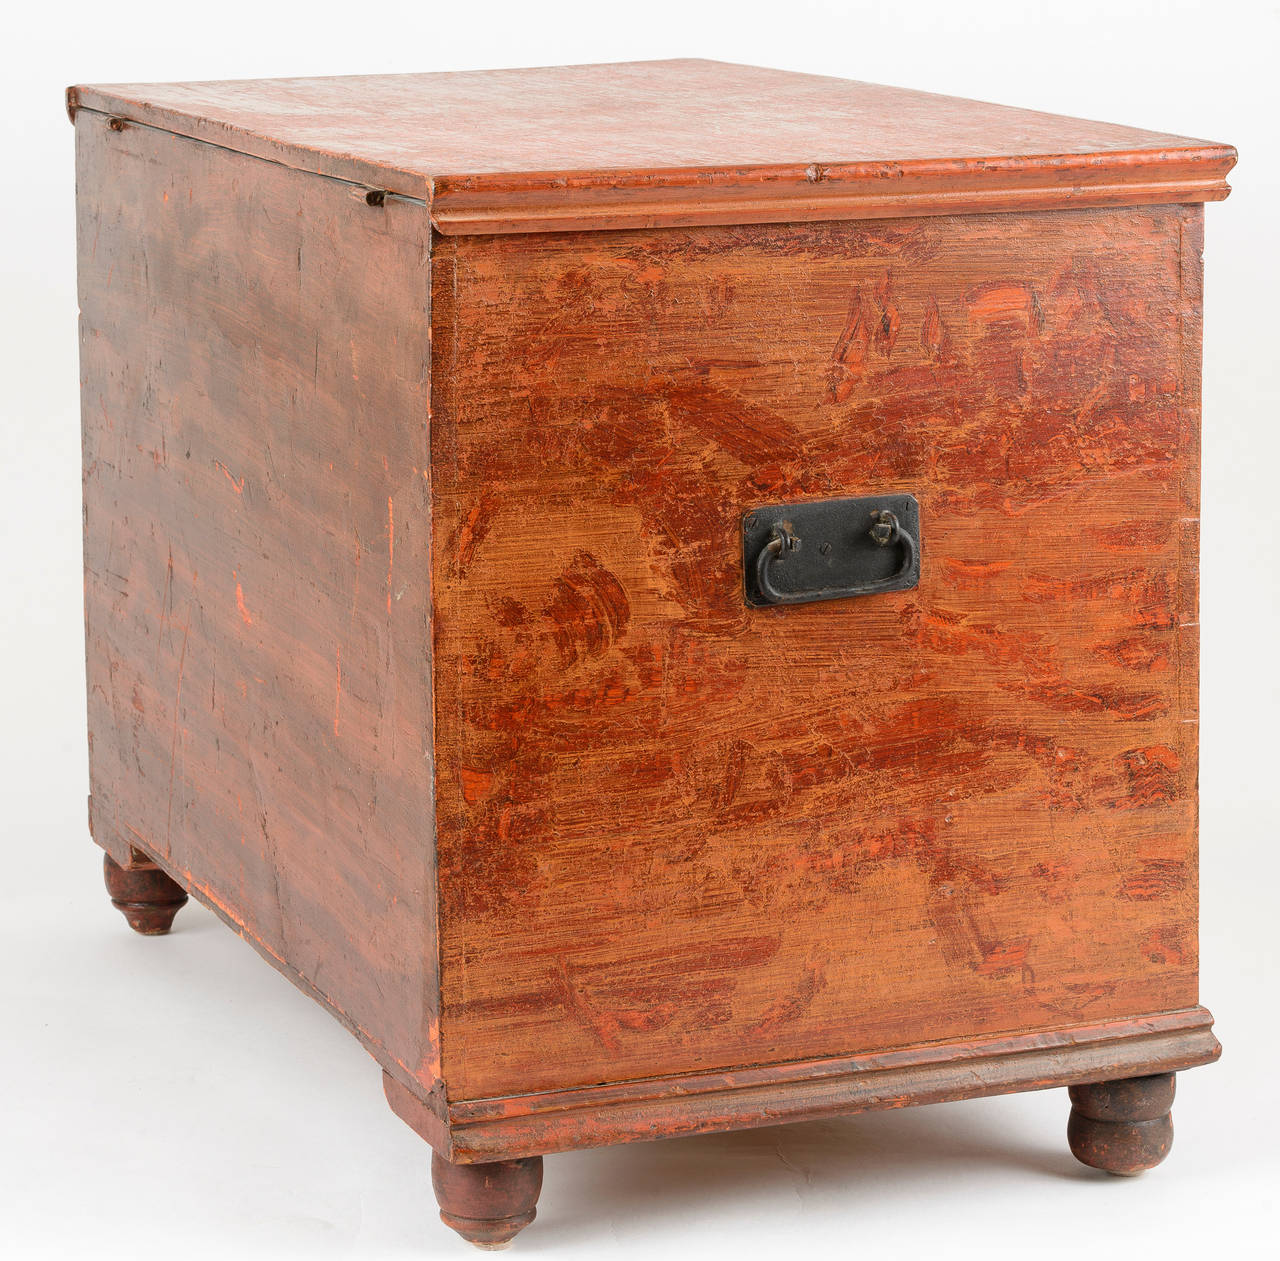 Iron American 18th Century Painted Blanket Chest